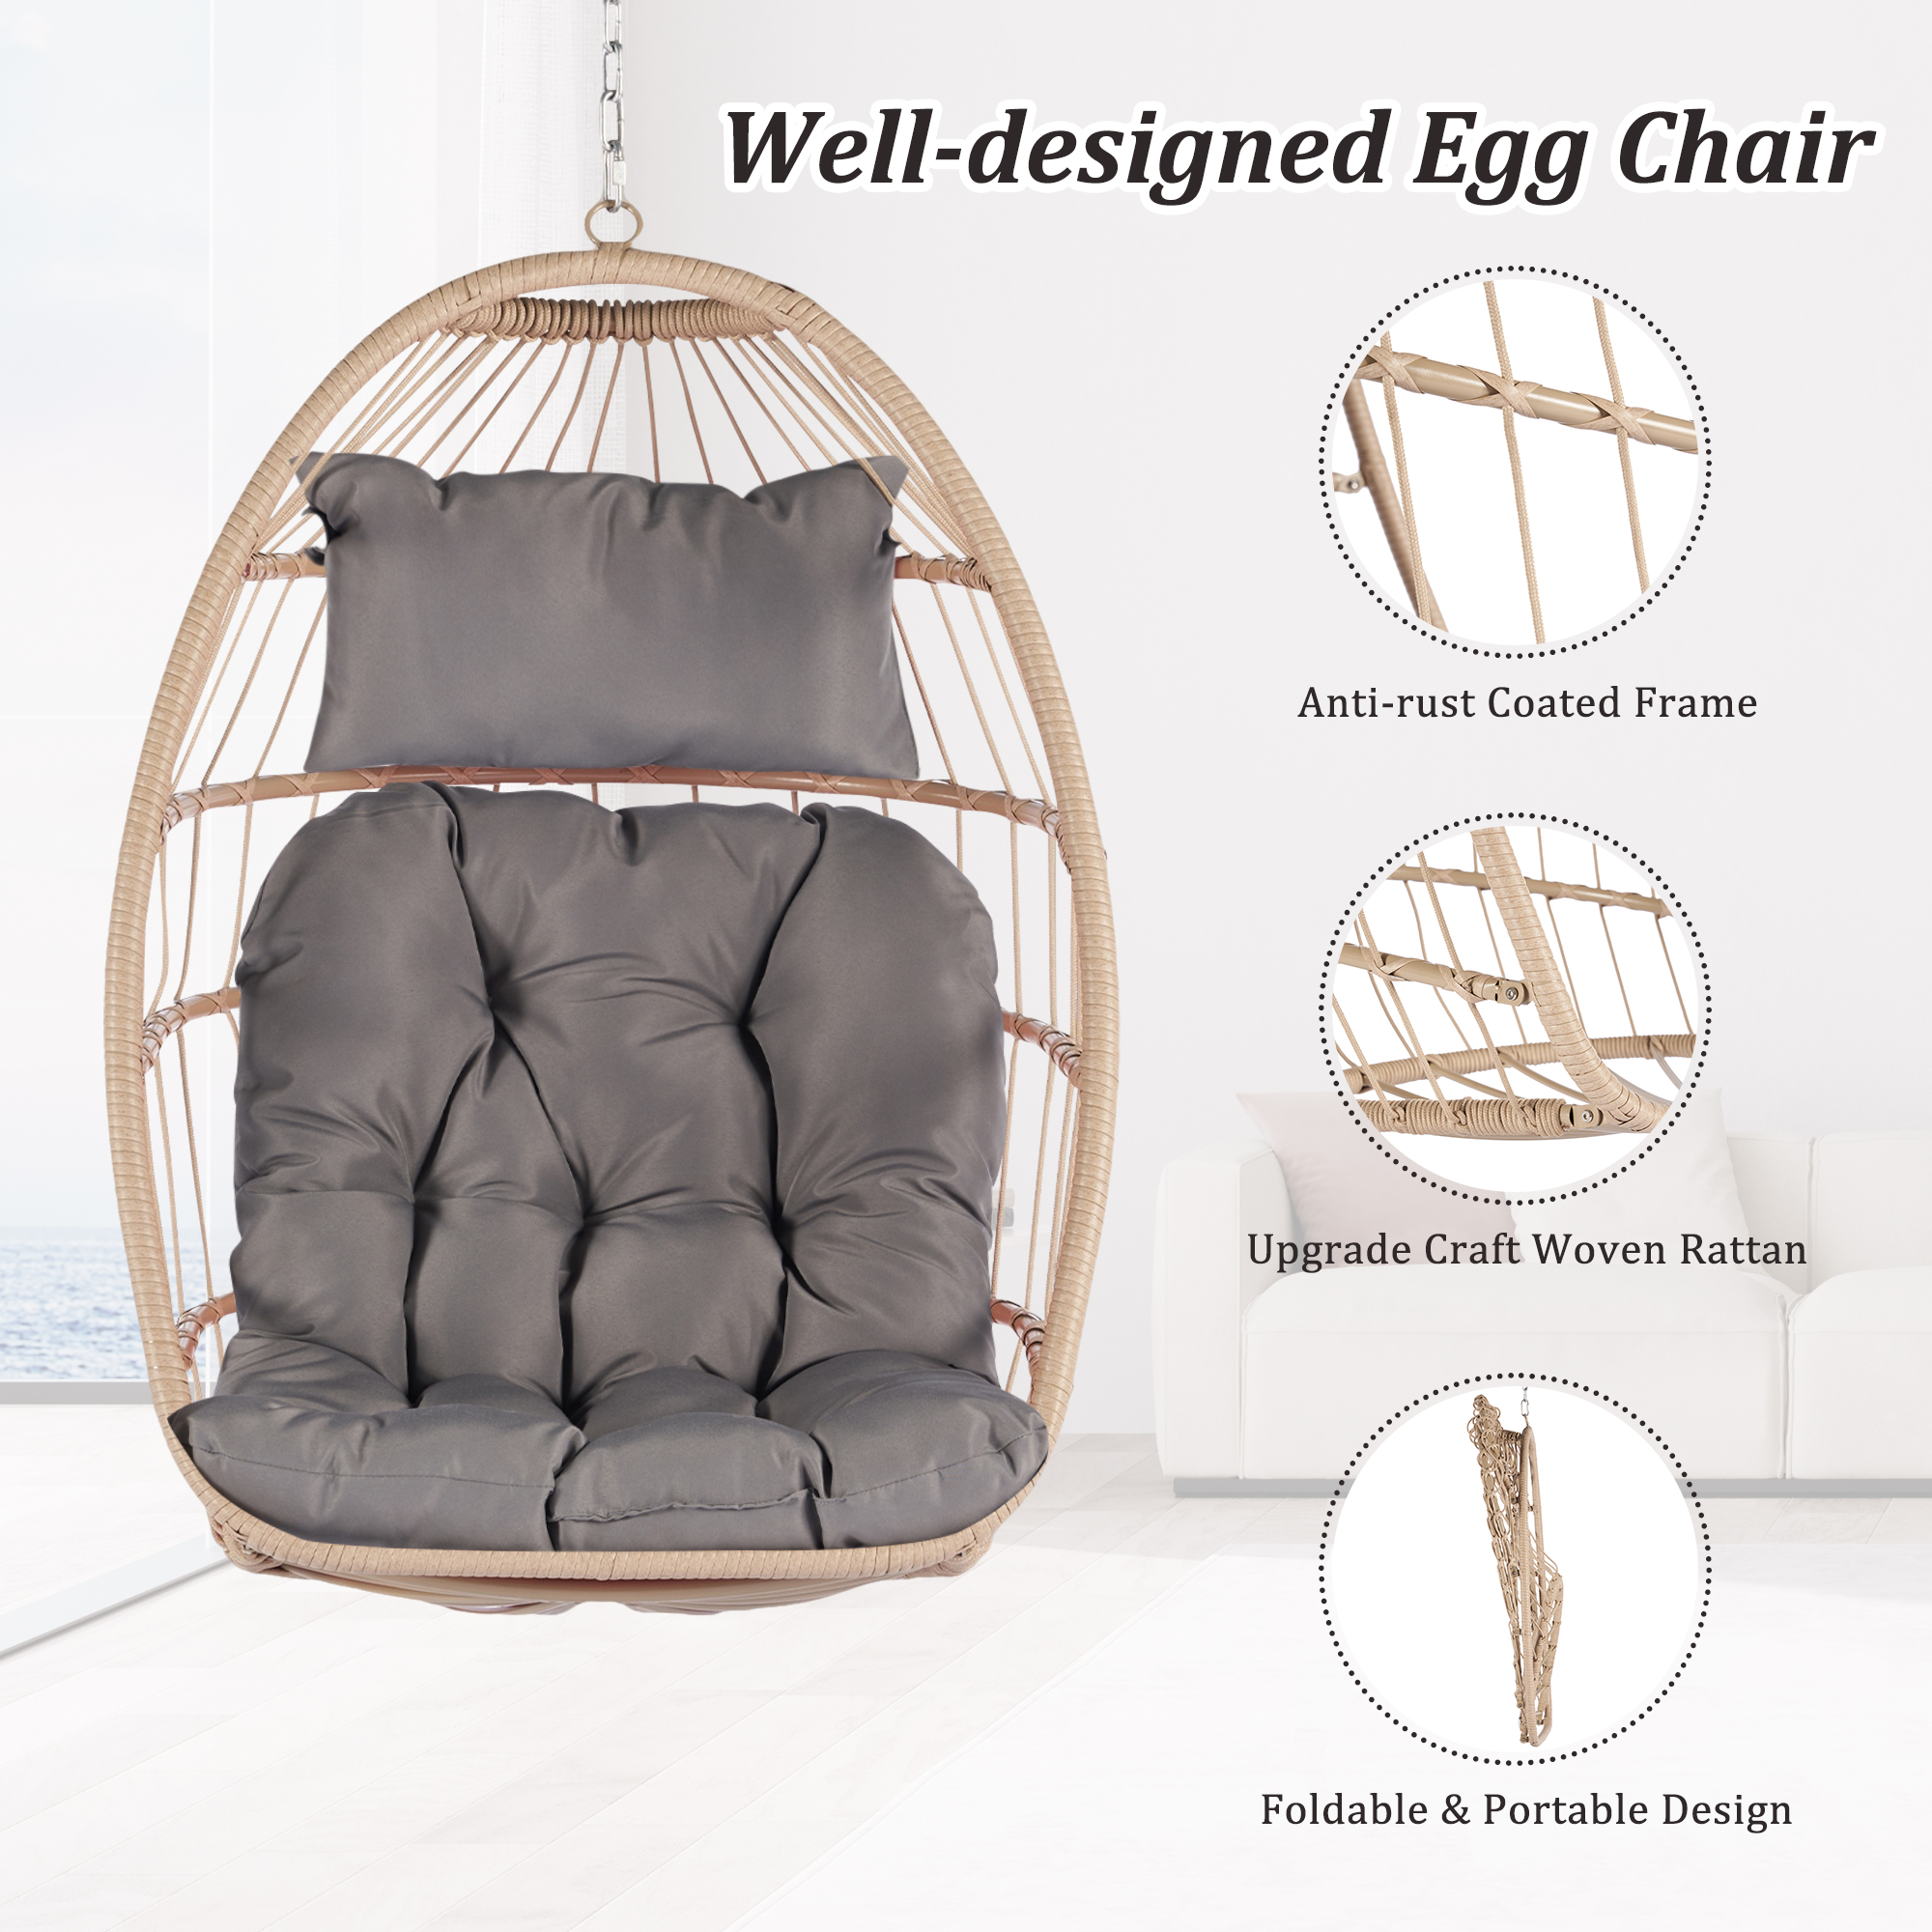 Patio Wicker Hanging Chair, Egg Chair Hammock Chair with UV Resistant Cushion and Pillow for Indoor Outdoor, Patio Backyard Balcony Lounge Rattan Swing Chair - image 4 of 6